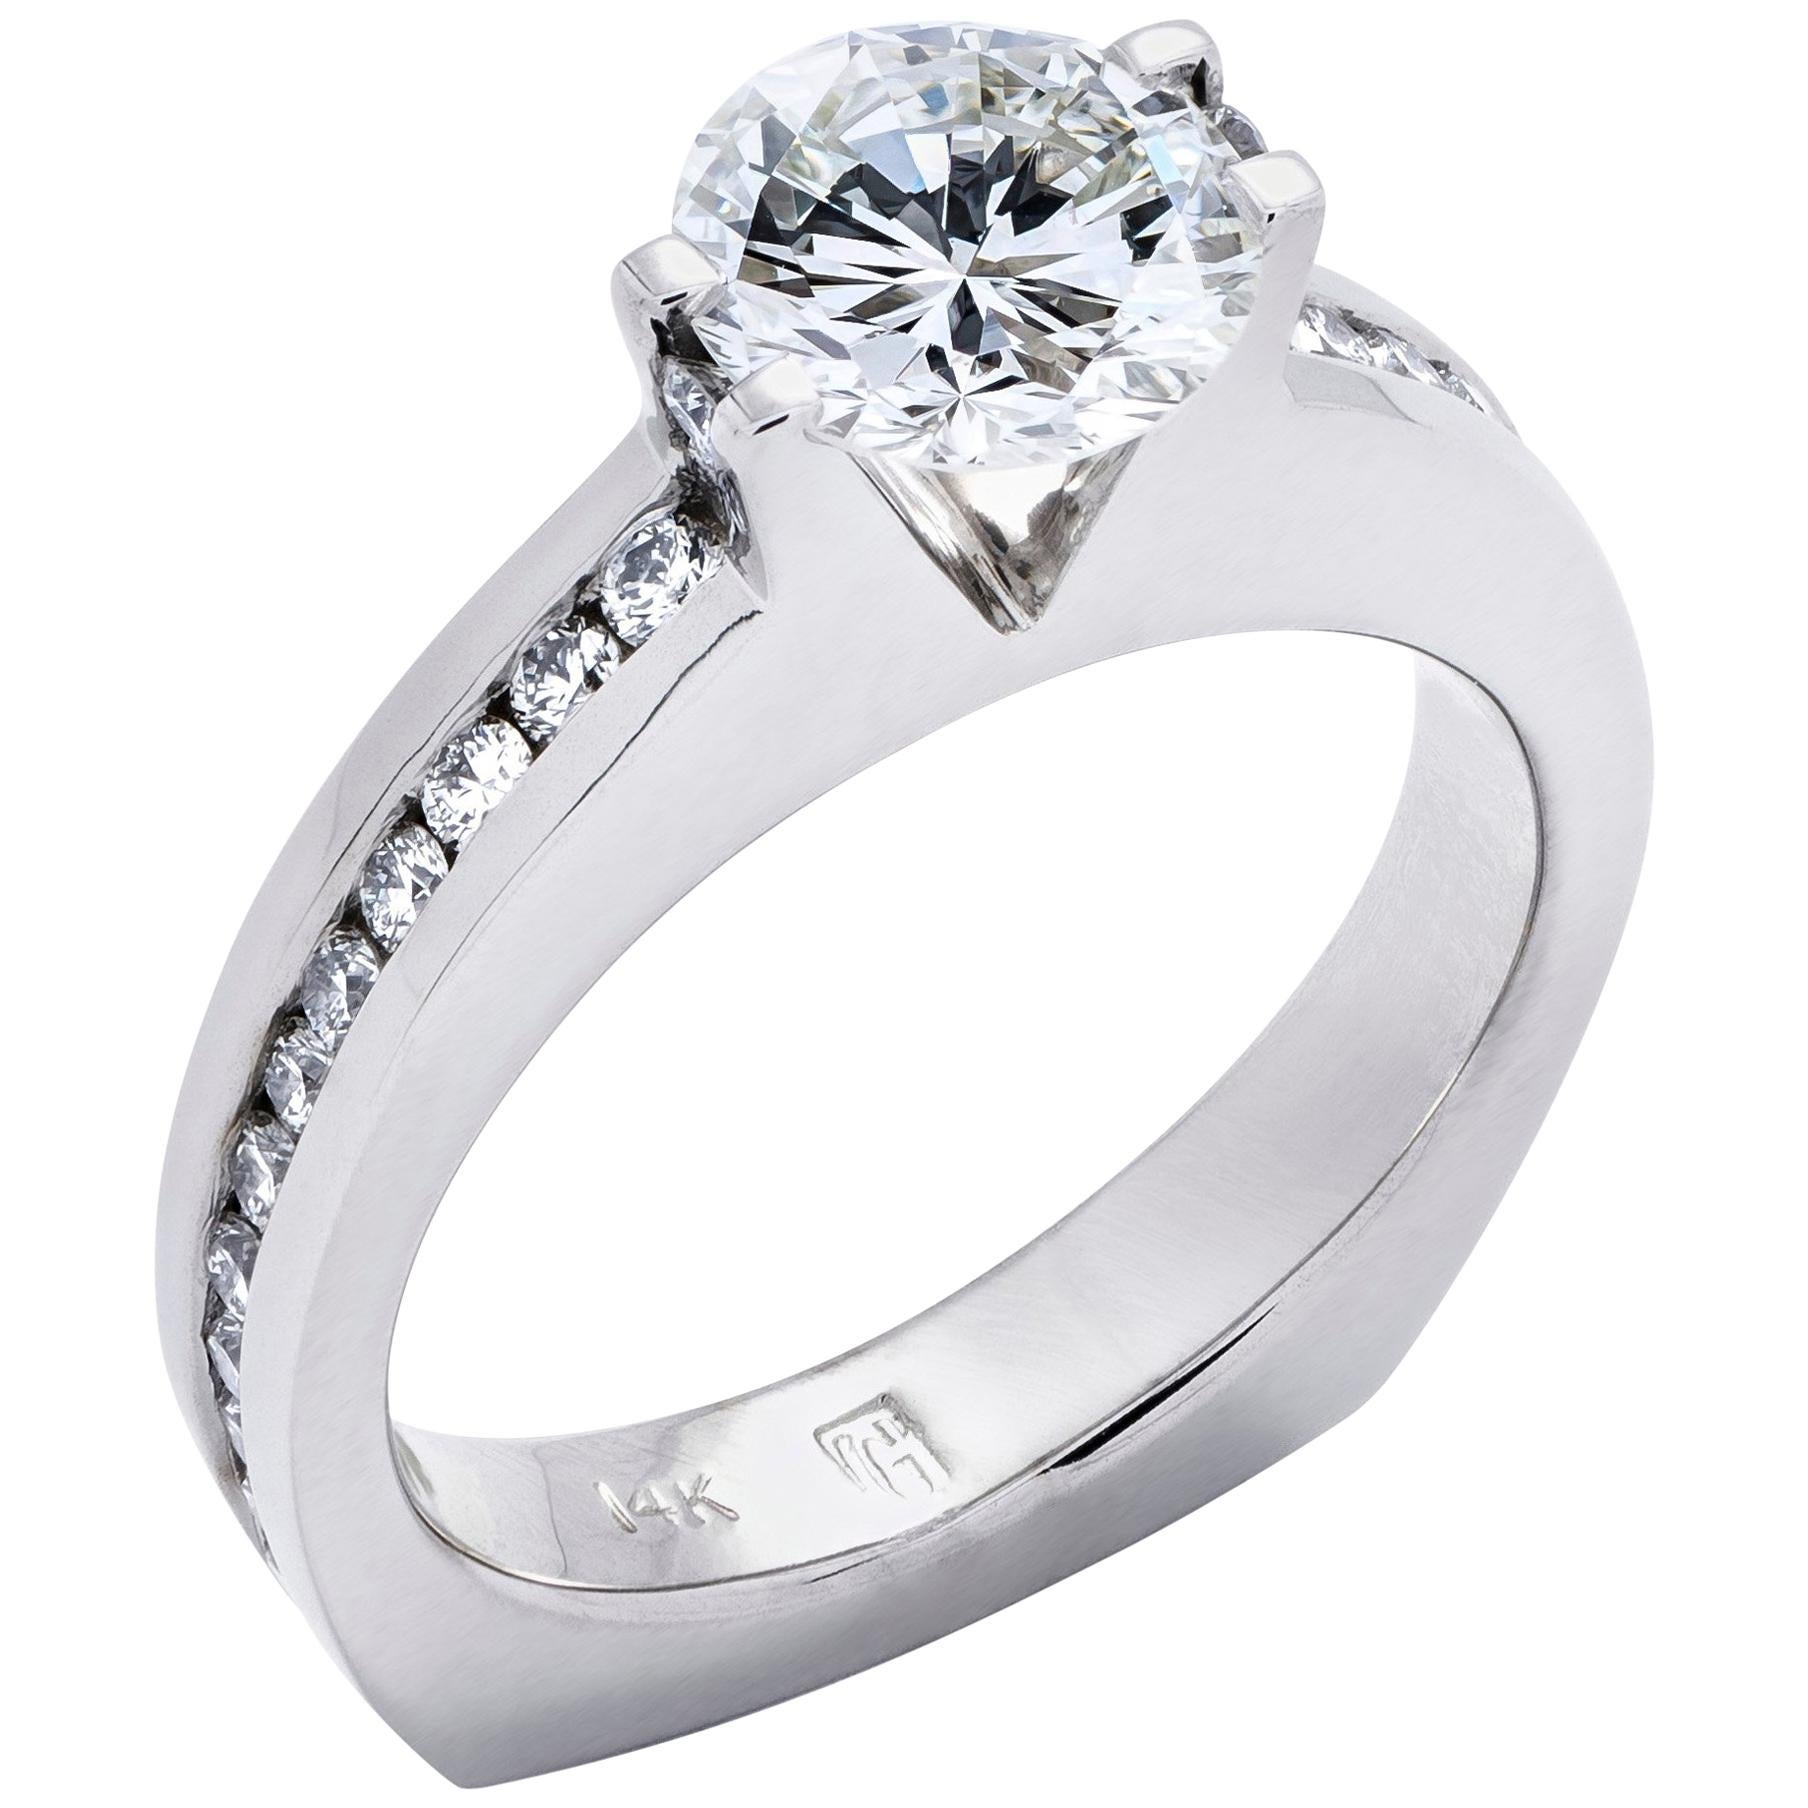 White Gold Ring with 1.51 Carat Diamond and 0.65 Carat in Accent Diamonds For Sale